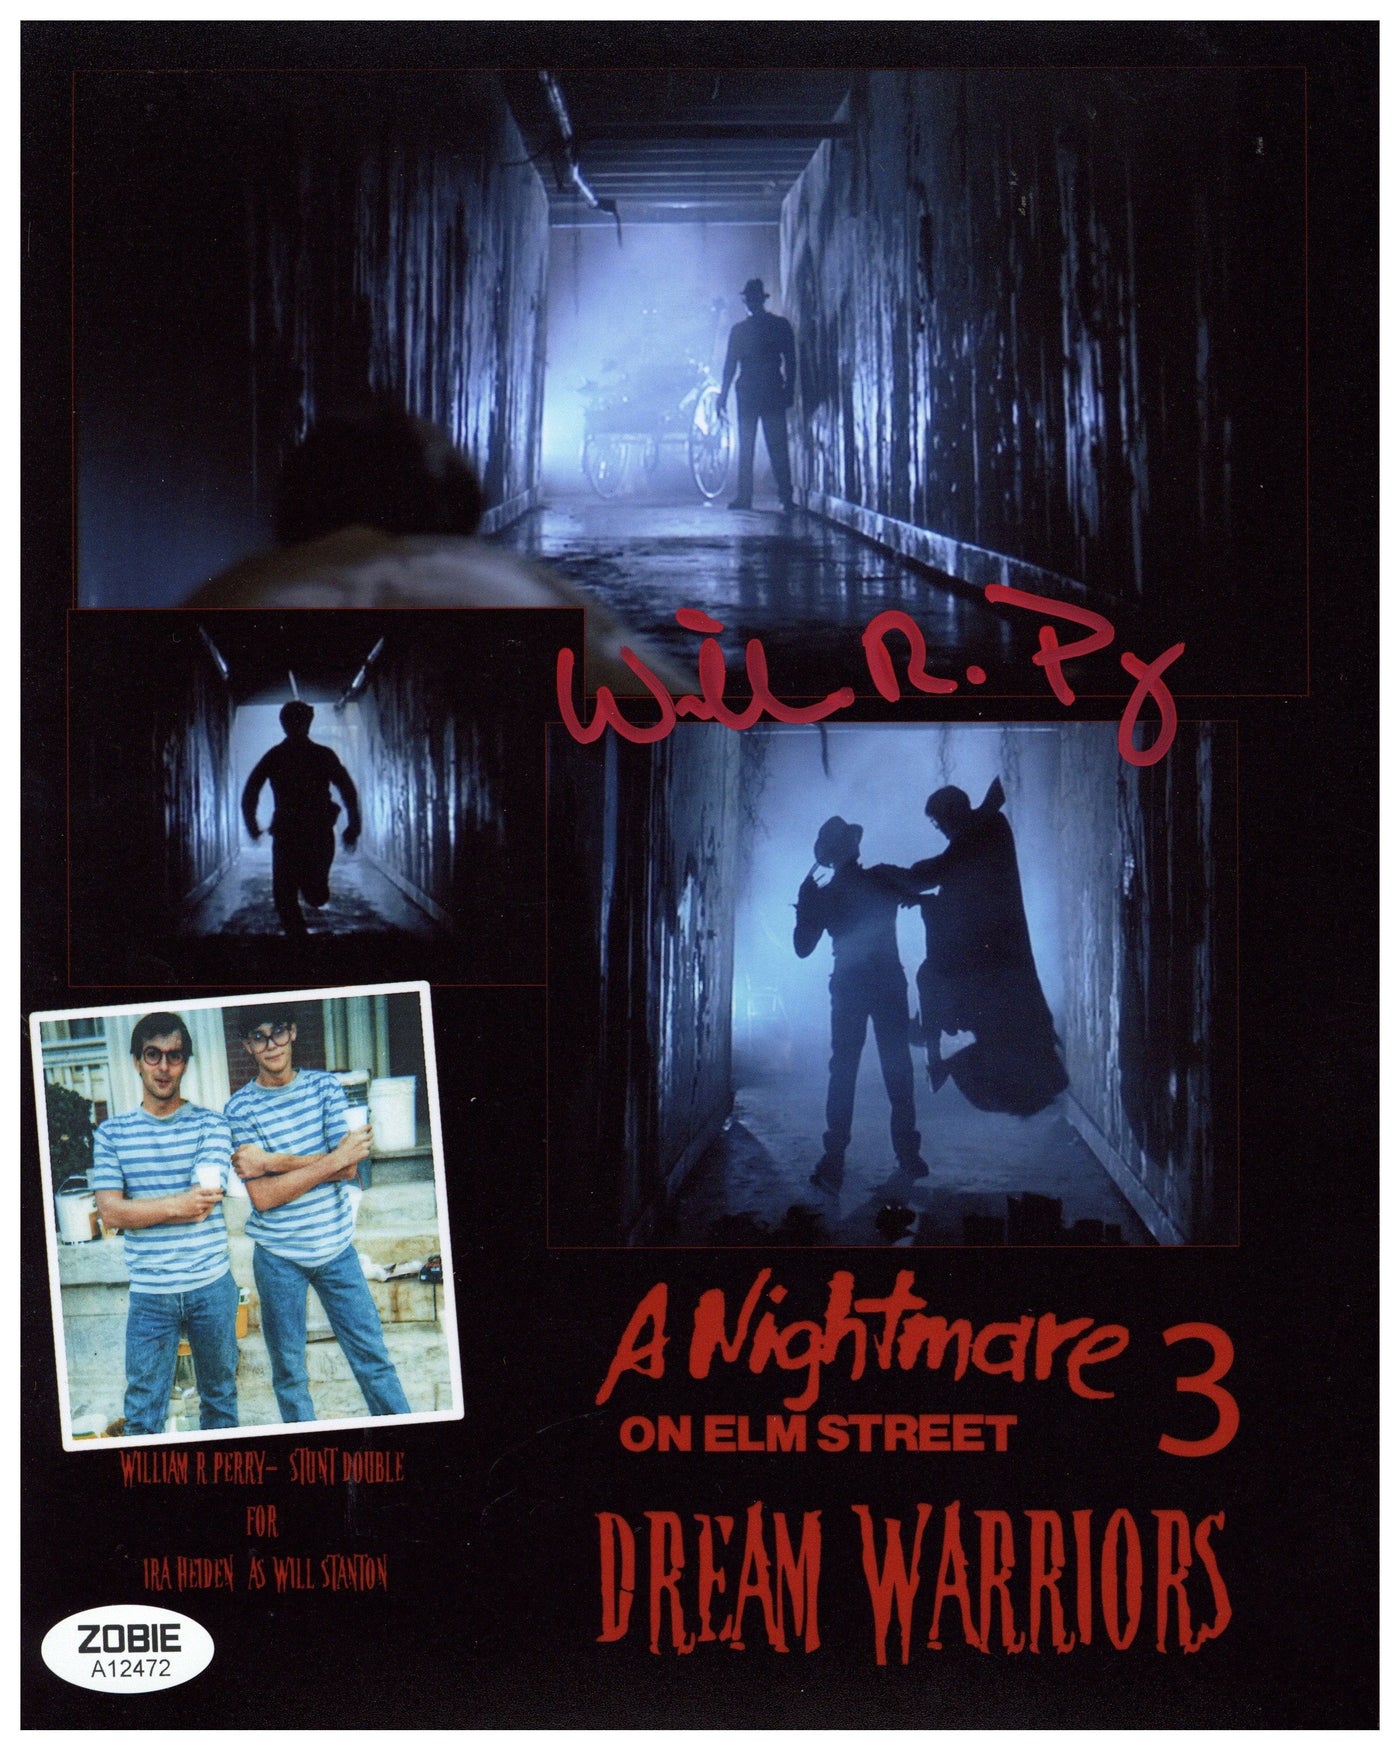 William Perry Signed 8x10 Photo Nightmare on Elm Street Dream Warriors Autographed